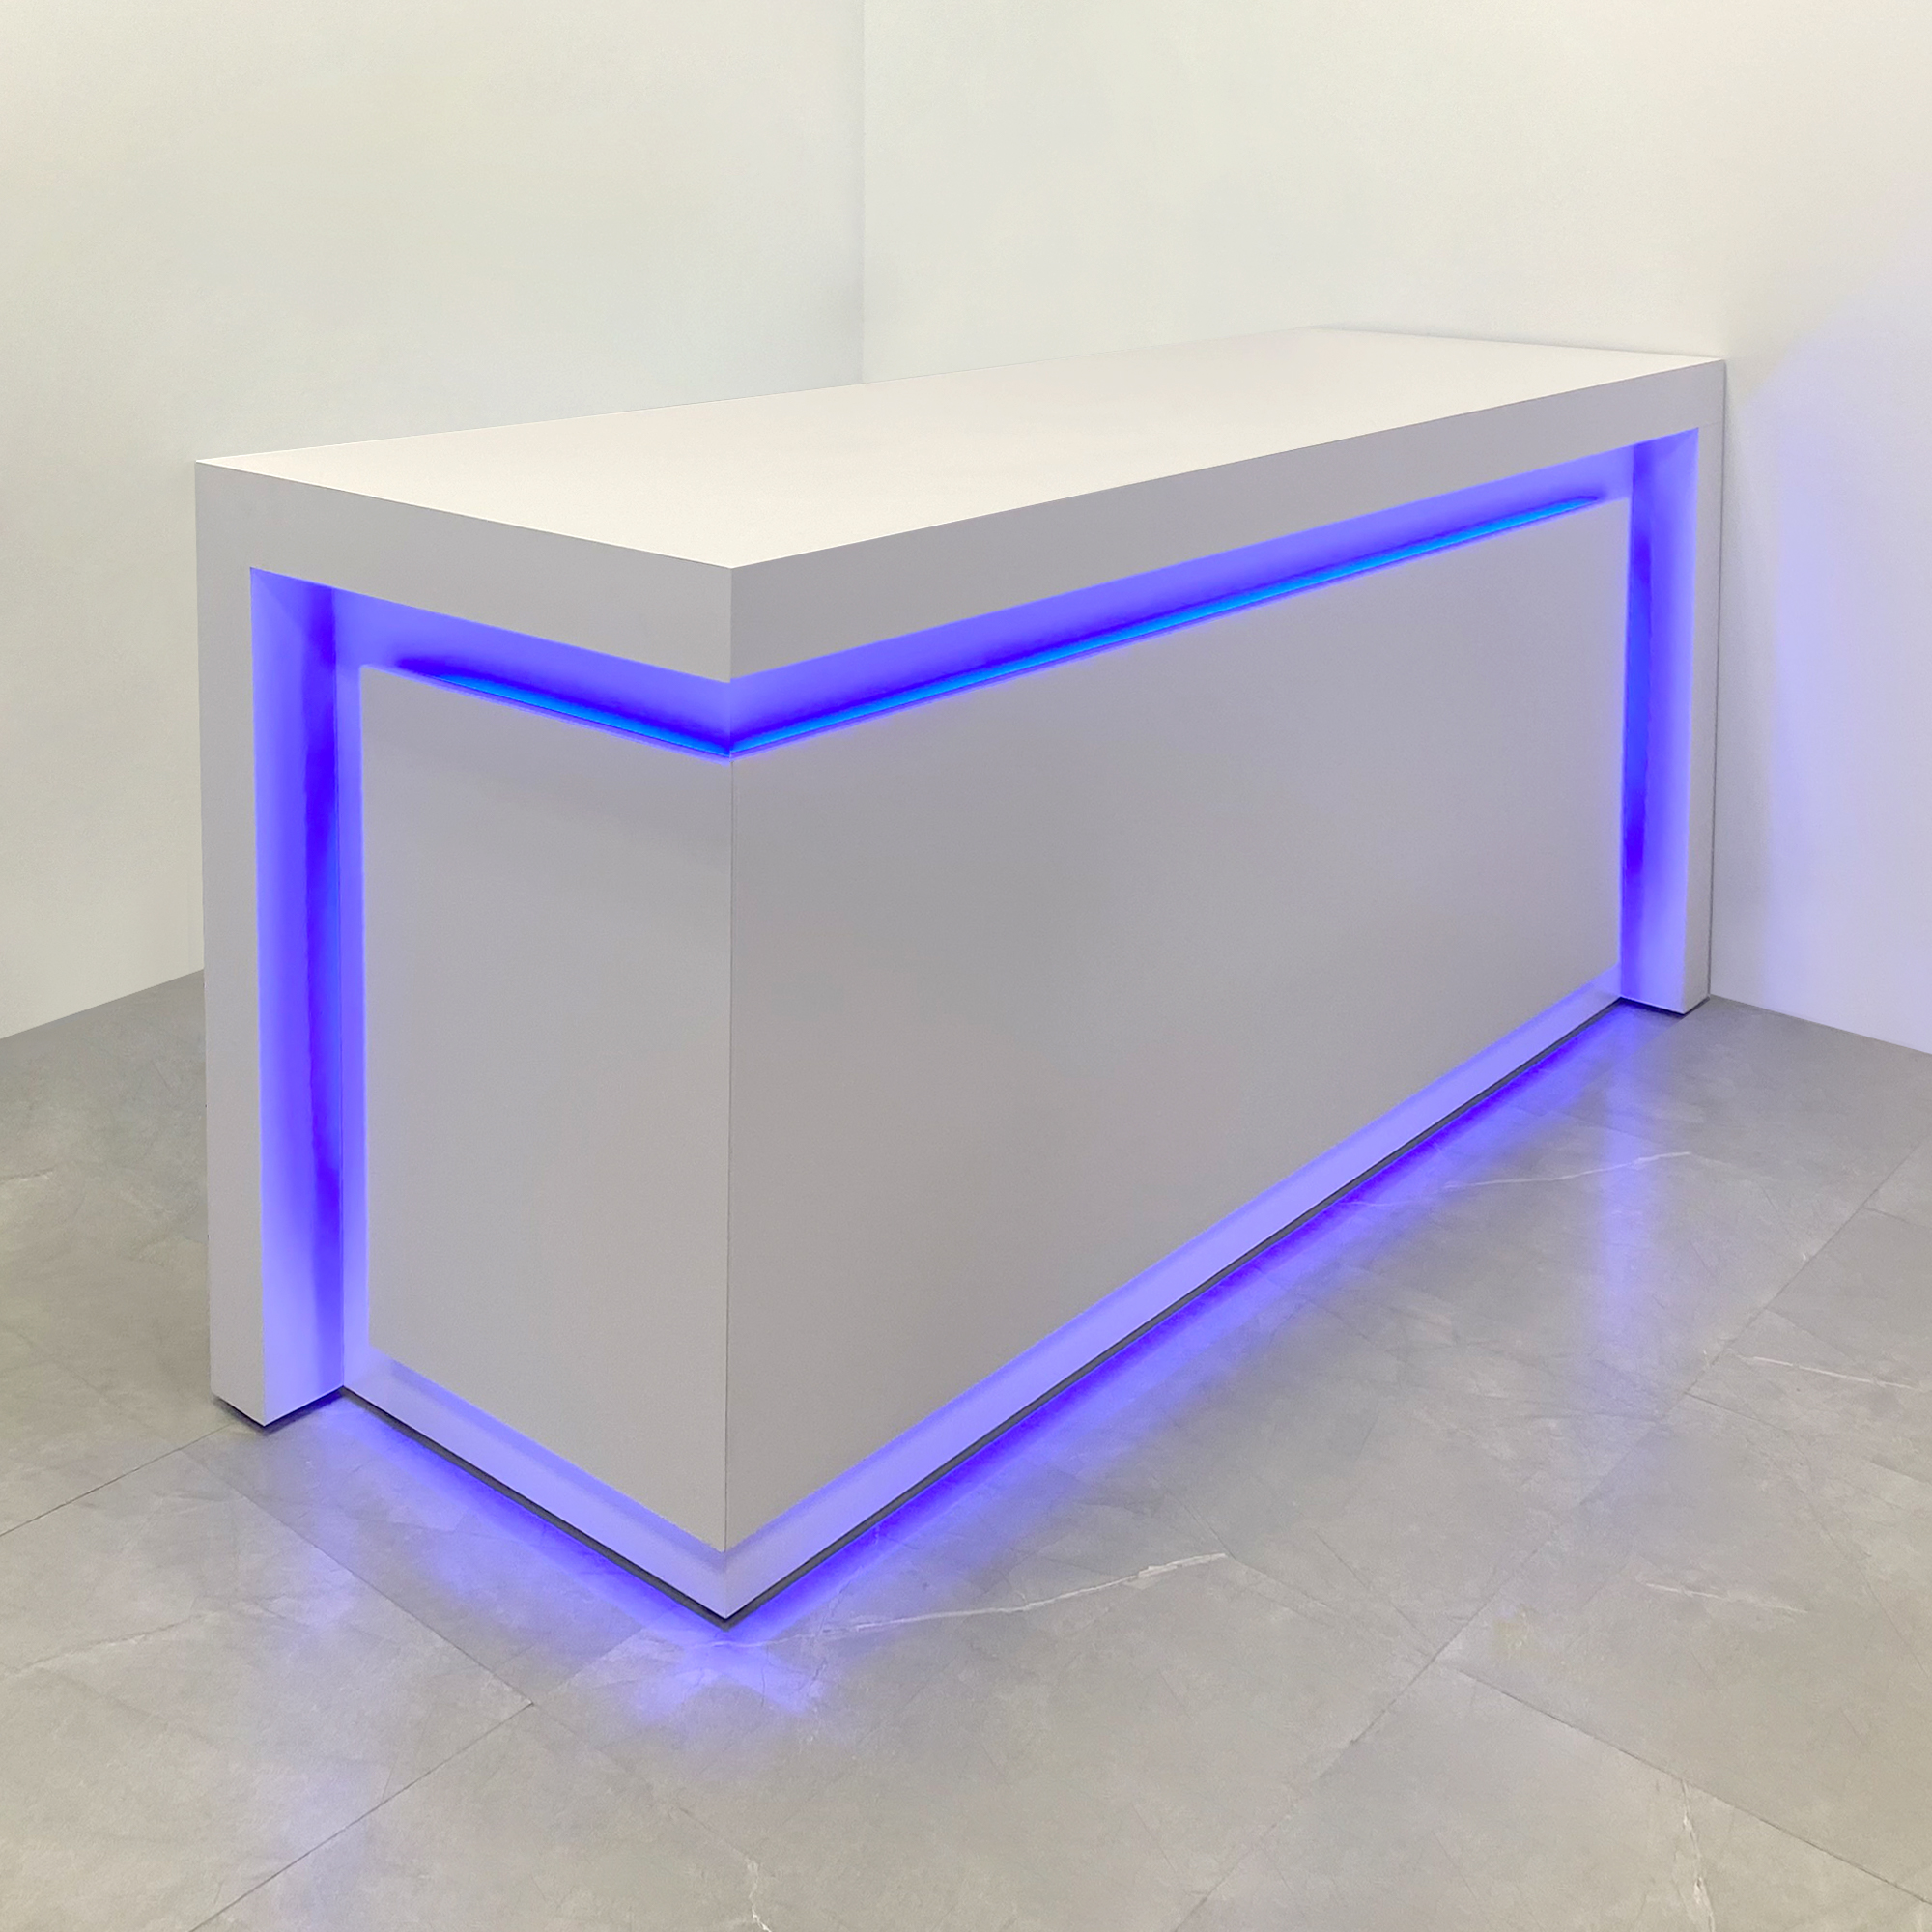 90-inch New York L-Shape Retail Custom Reception Desk in dover off-white matte laminate desk, with color LED, shown here.